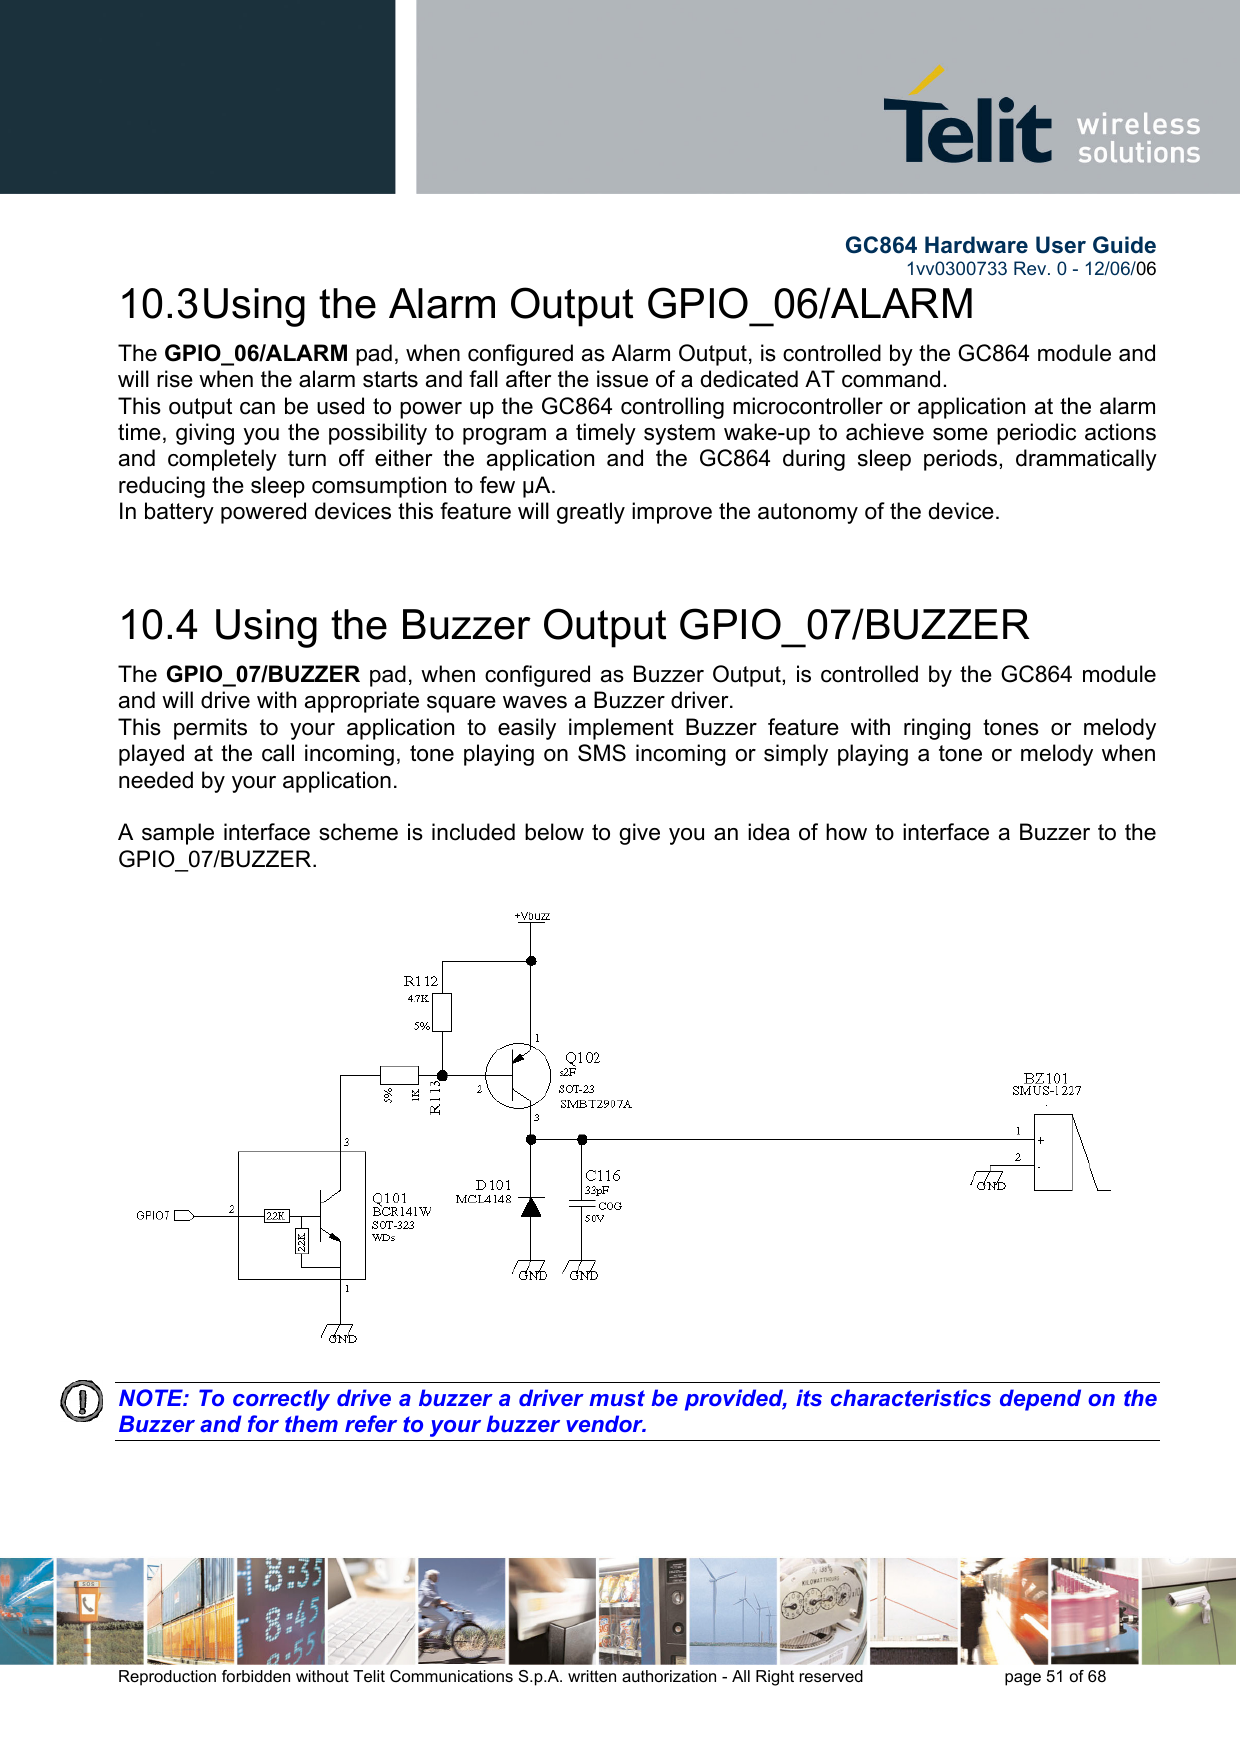        GC864 Hardware User Guide  1vv0300733 Rev. 0 - 12/06/06  Reproduction forbidden without Telit Communications S.p.A. written authorization - All Right reserved    page 51 of 68  10.3 Using the Alarm Output GPIO_06/ALARM The GPIO_06/ALARM pad, when configured as Alarm Output, is controlled by the GC864 module and will rise when the alarm starts and fall after the issue of a dedicated AT command. This output can be used to power up the GC864 controlling microcontroller or application at the alarm time, giving you the possibility to program a timely system wake-up to achieve some periodic actions and completely turn off either the application and the GC864 during sleep periods, drammatically reducing the sleep comsumption to few μA. In battery powered devices this feature will greatly improve the autonomy of the device.  10.4  Using the Buzzer Output GPIO_07/BUZZER The GPIO_07/BUZZER pad, when configured as Buzzer Output, is controlled by the GC864 module and will drive with appropriate square waves a Buzzer driver. This permits to your application to easily implement Buzzer feature with ringing tones or melody played at the call incoming, tone playing on SMS incoming or simply playing a tone or melody when needed by your application.  A sample interface scheme is included below to give you an idea of how to interface a Buzzer to the GPIO_07/BUZZER.  NOTE: To correctly drive a buzzer a driver must be provided, its characteristics depend on the Buzzer and for them refer to your buzzer vendor.   